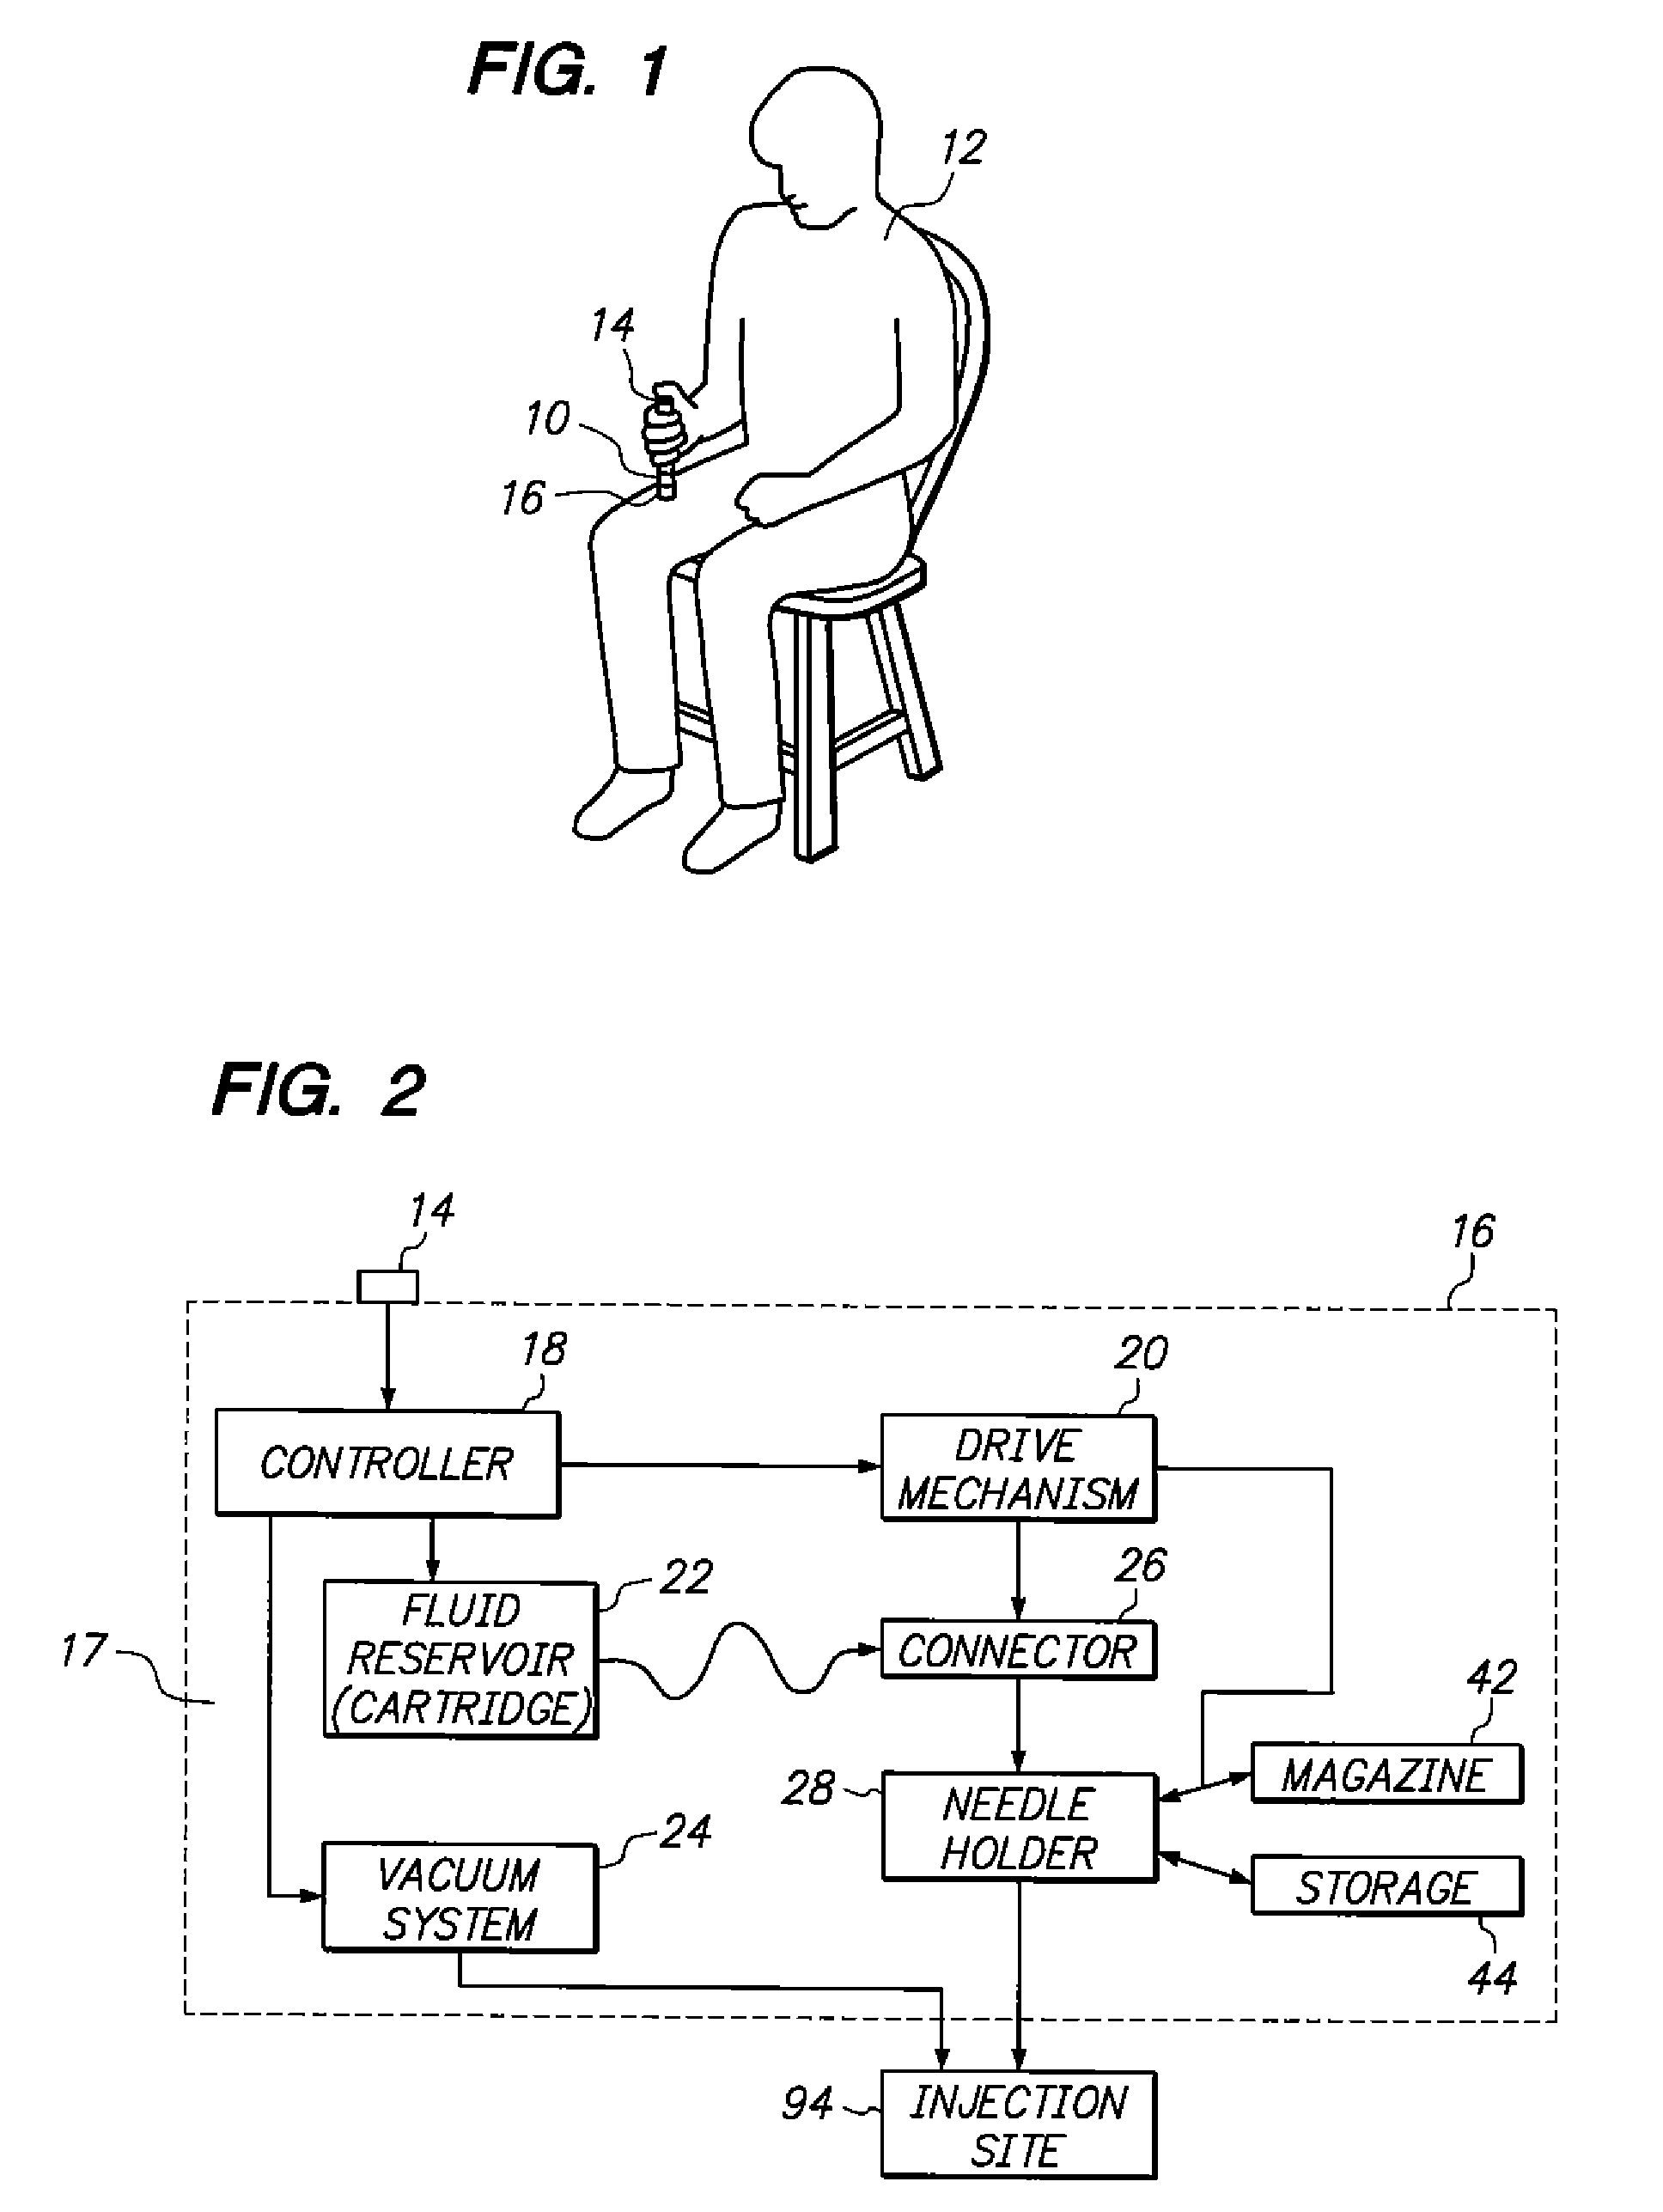 Injection System With Hidden Needles